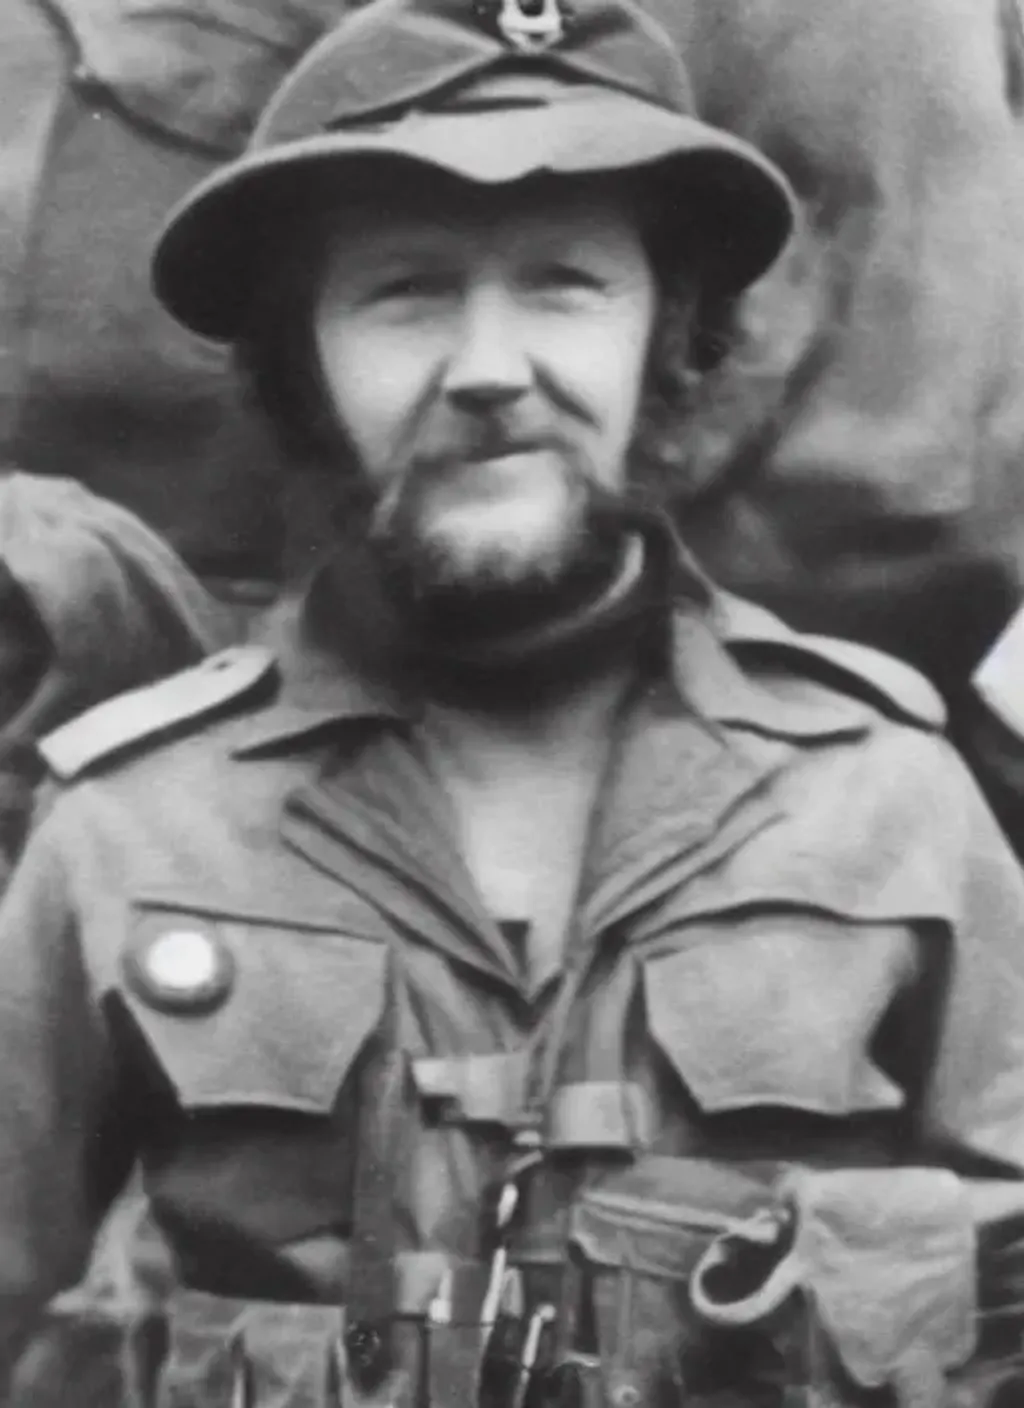 Prompt: Photograph of Bill Oddie as a soldier in World War II, black and white